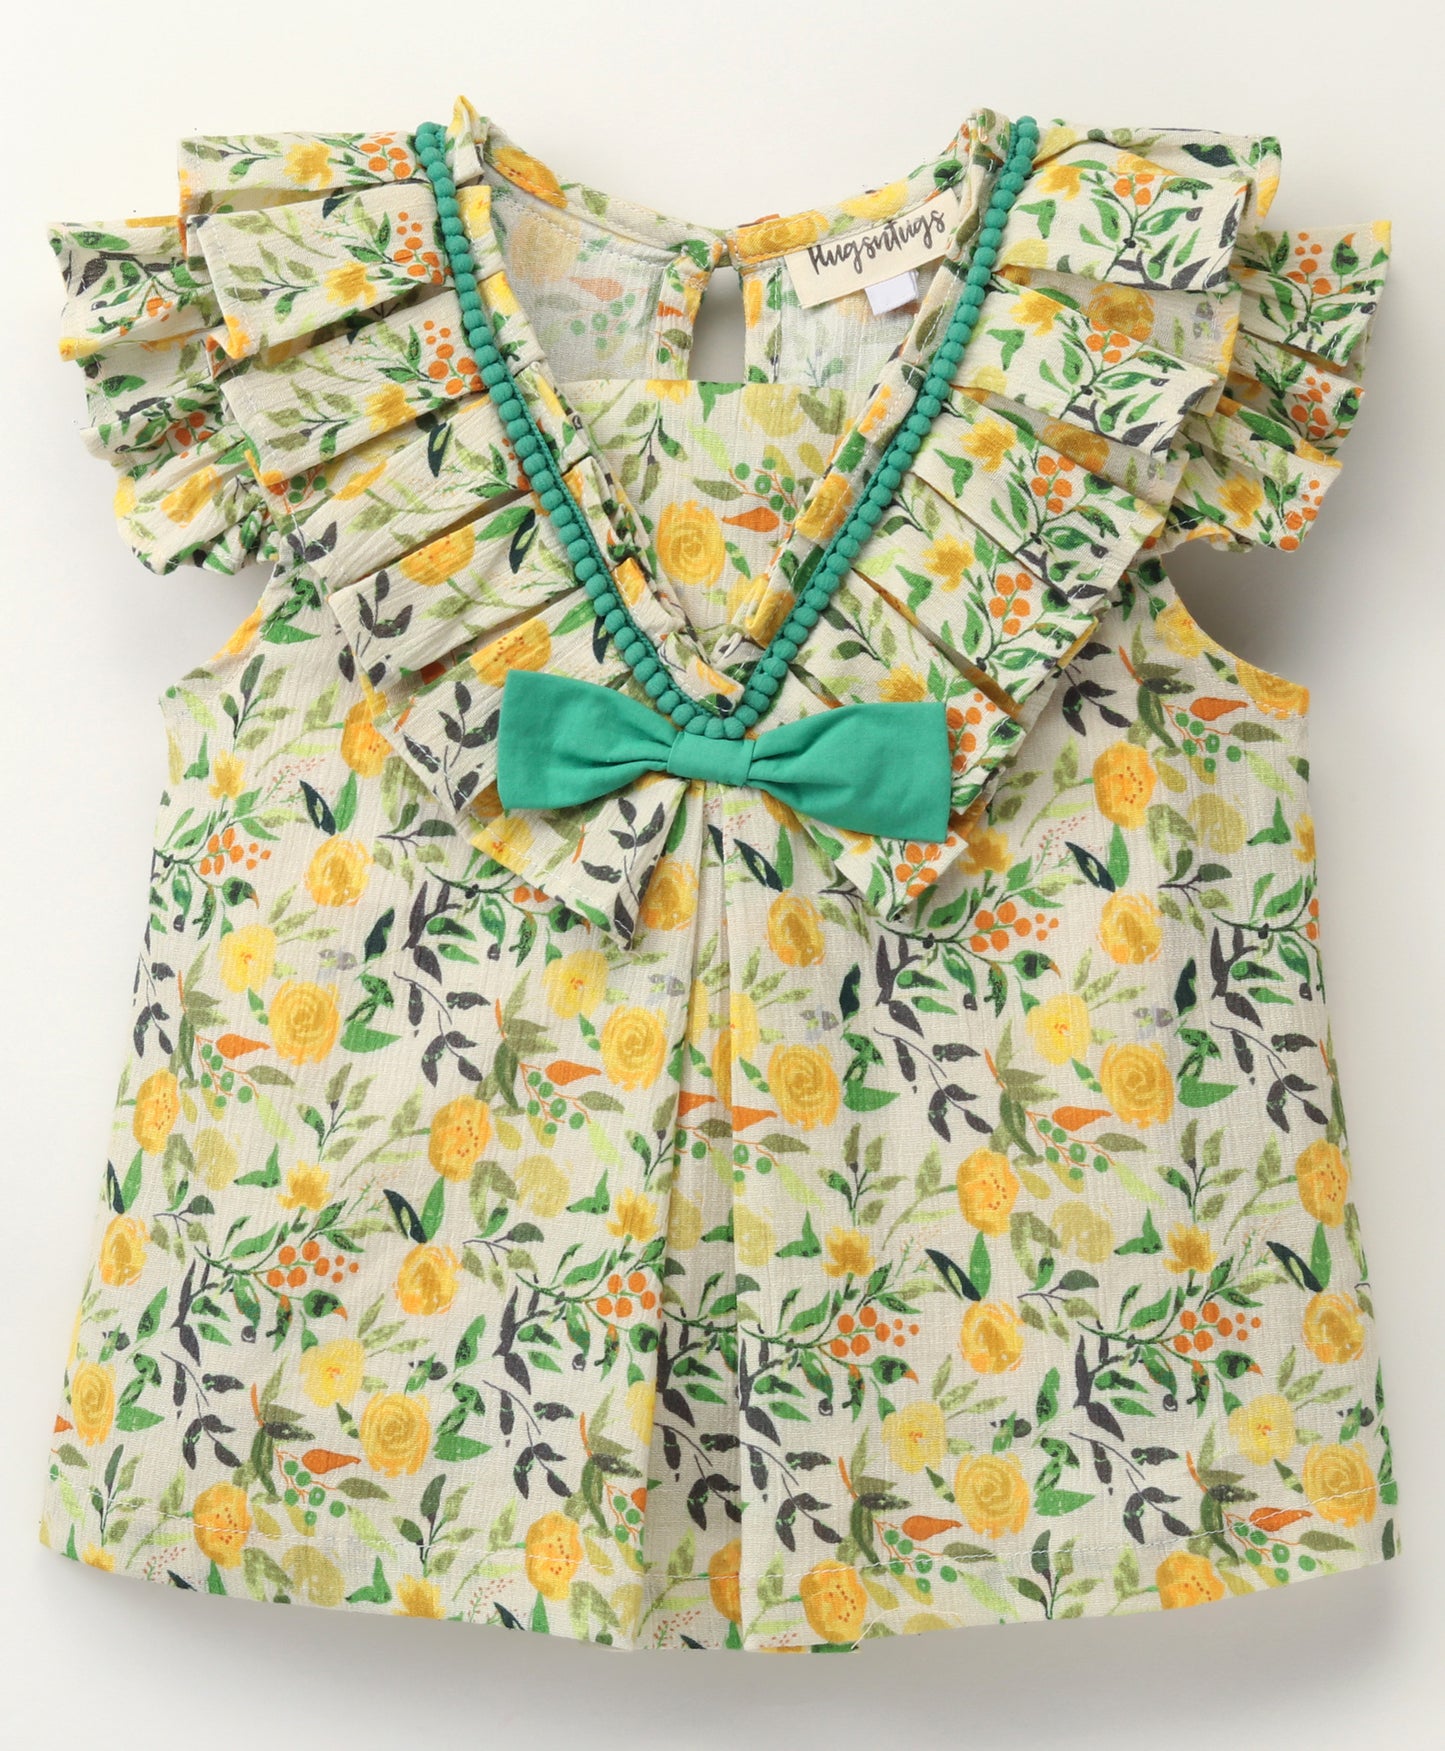 Cap Sleeves Seamless Vintage Style Floral Printed With Lace & Frills Along The Yoke Detailed Bow Embellished Top - Yellow